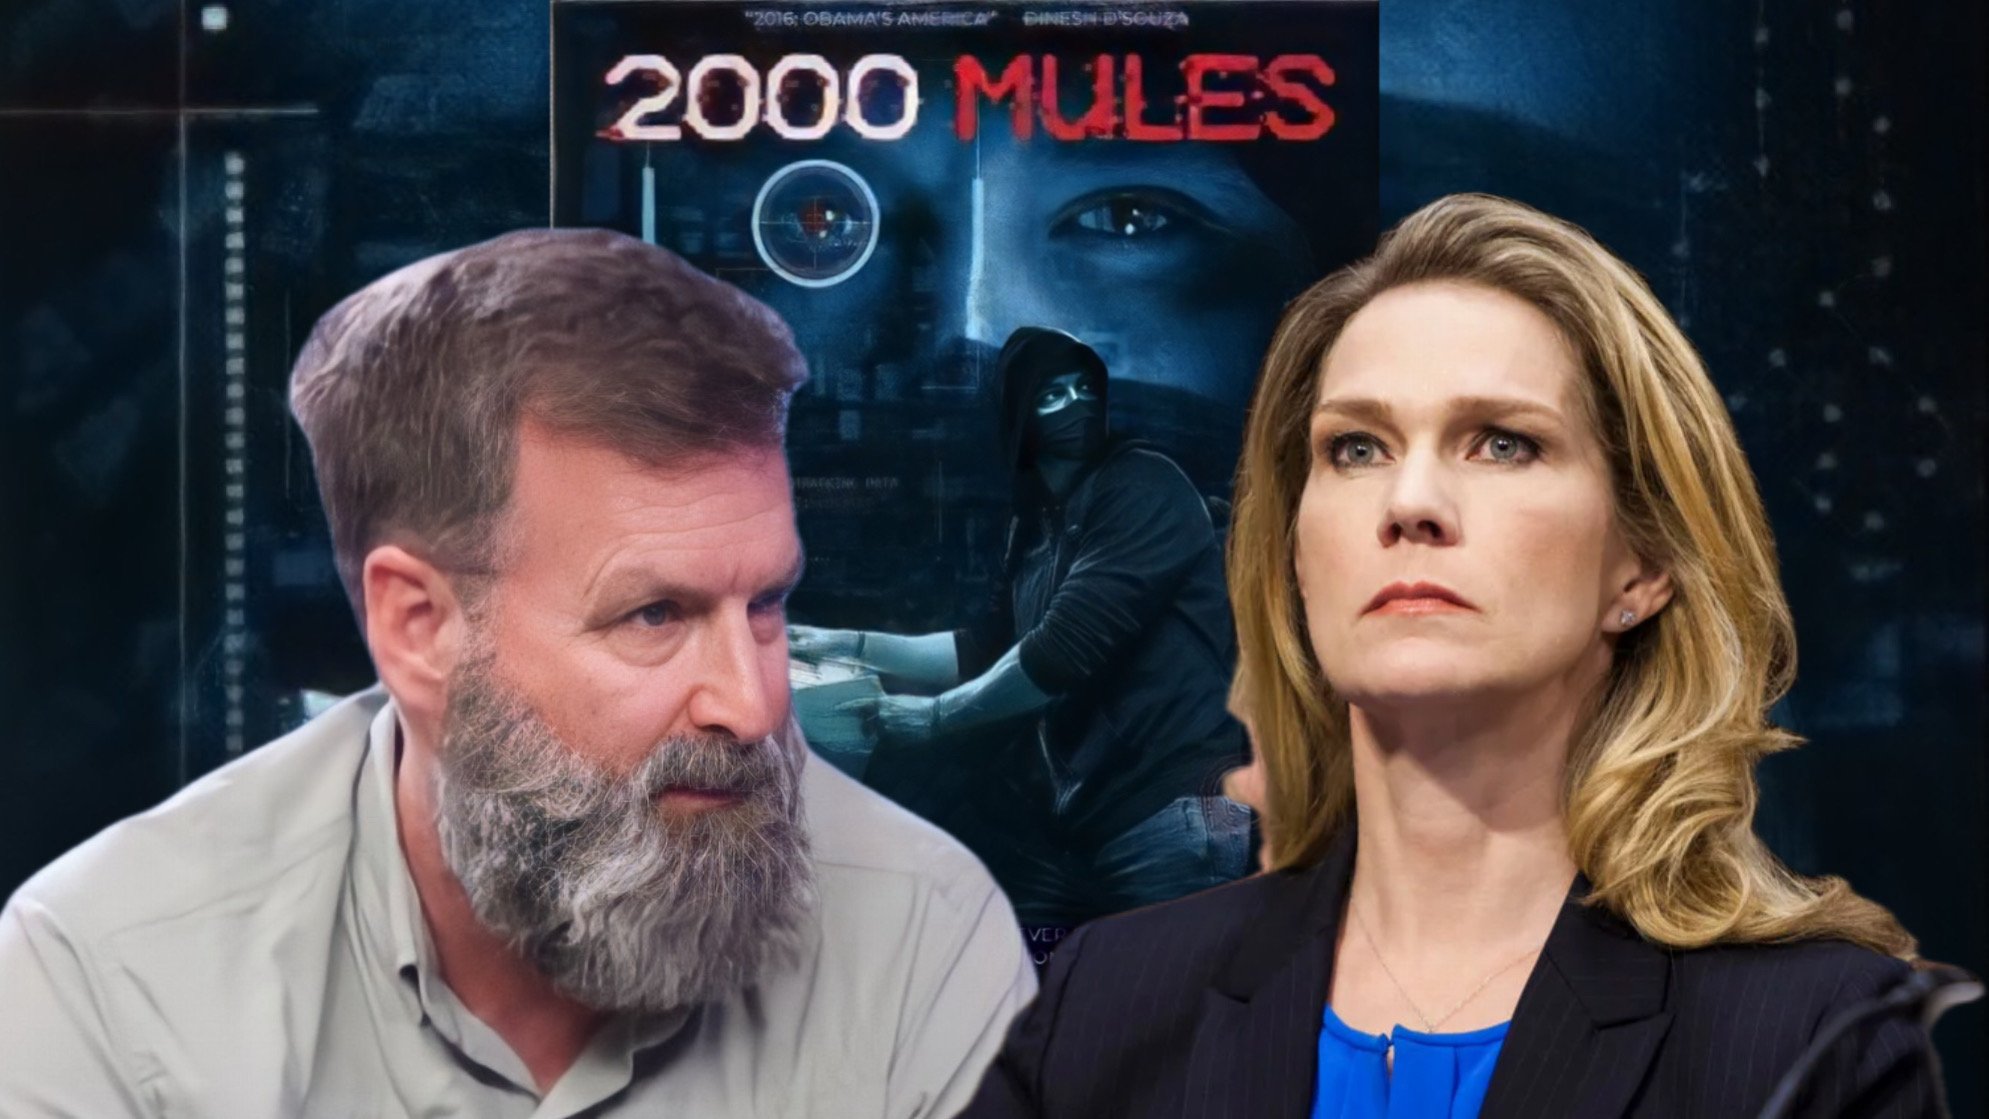 LIVE at 5 PM ET: Gateway Pundit and 100% Fed Up to Interview Investigators Catherine Engelbrecht and Gregg Phillips Behind Upcoming “2000 Mules” Movie